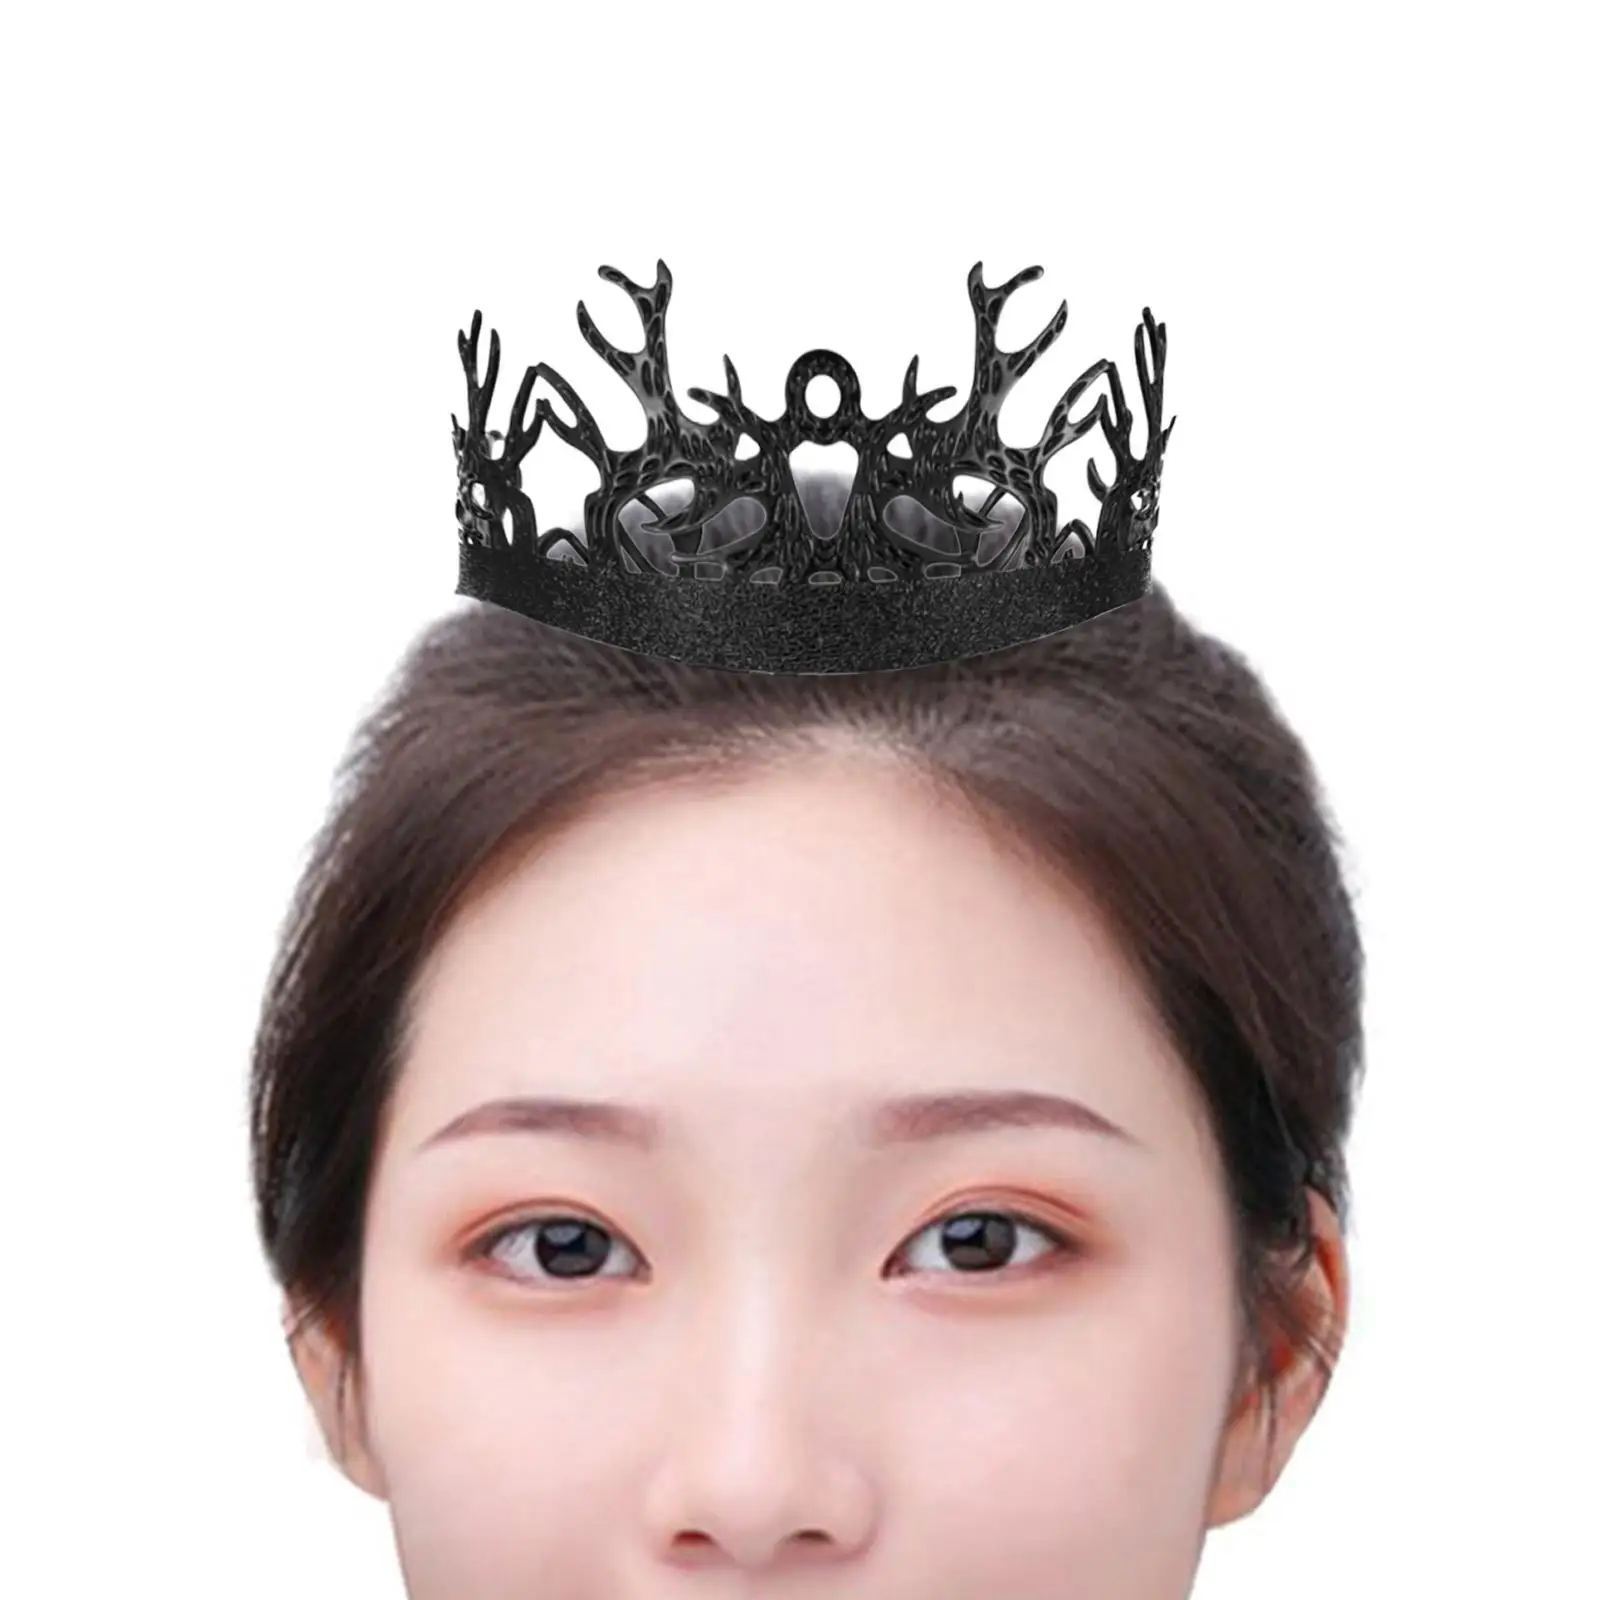 

Gothic Crown Headgear Gift Costume Fashion Prince Crowns Hairband Crown for Themed Parties Anniversary Halloween Festival Decor